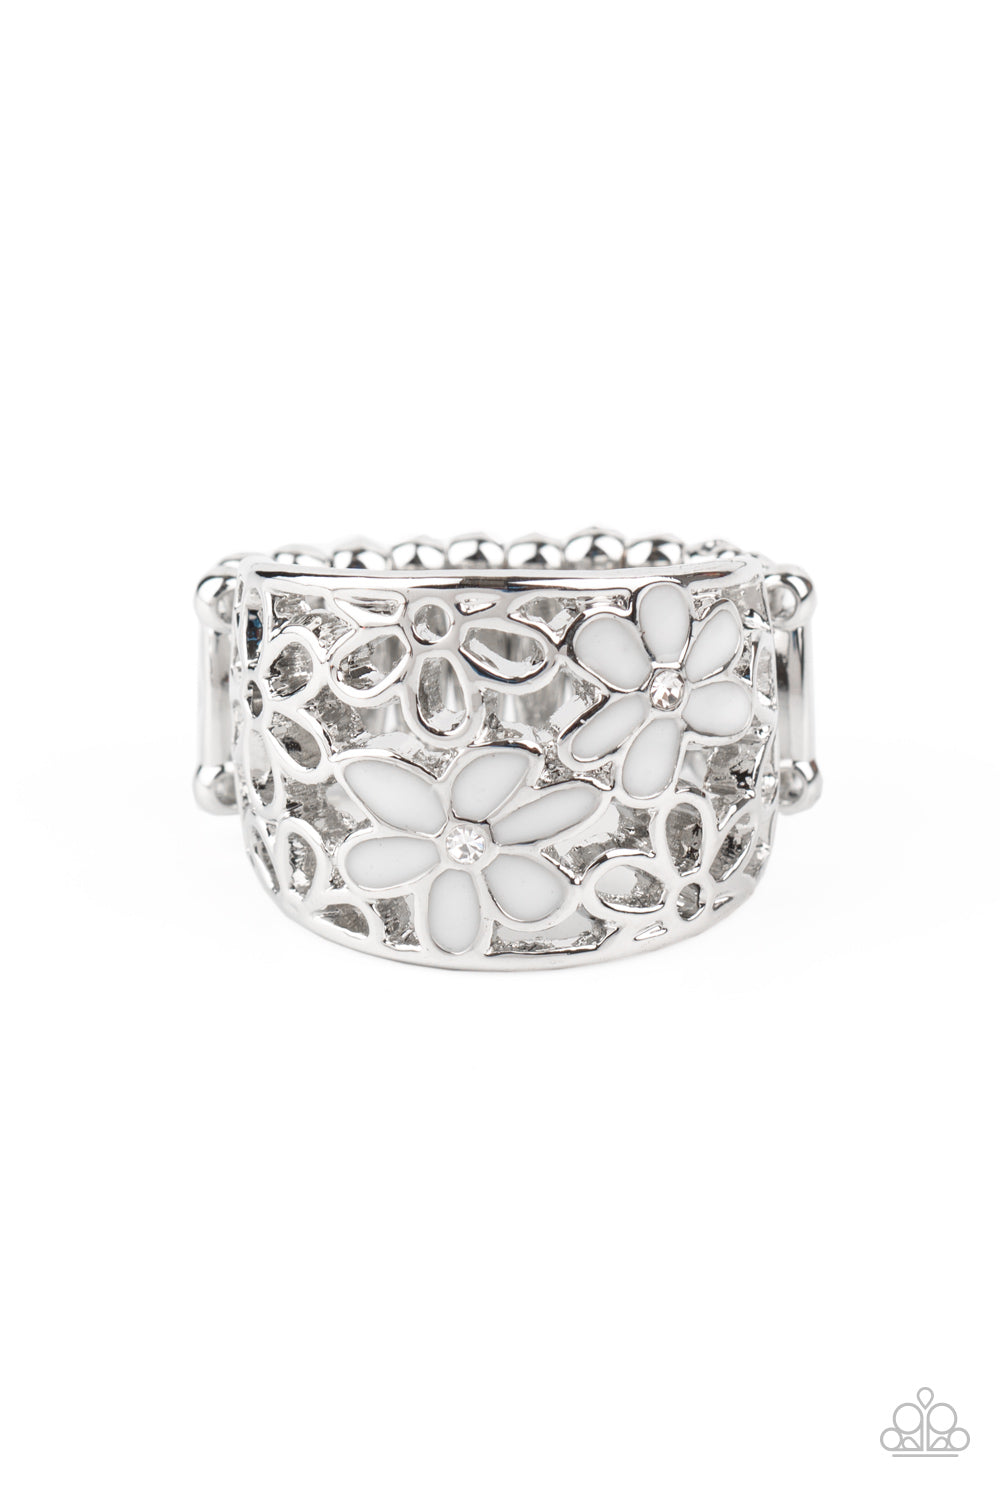 paparazzi-accessories-clear-as-daisy-white-ring